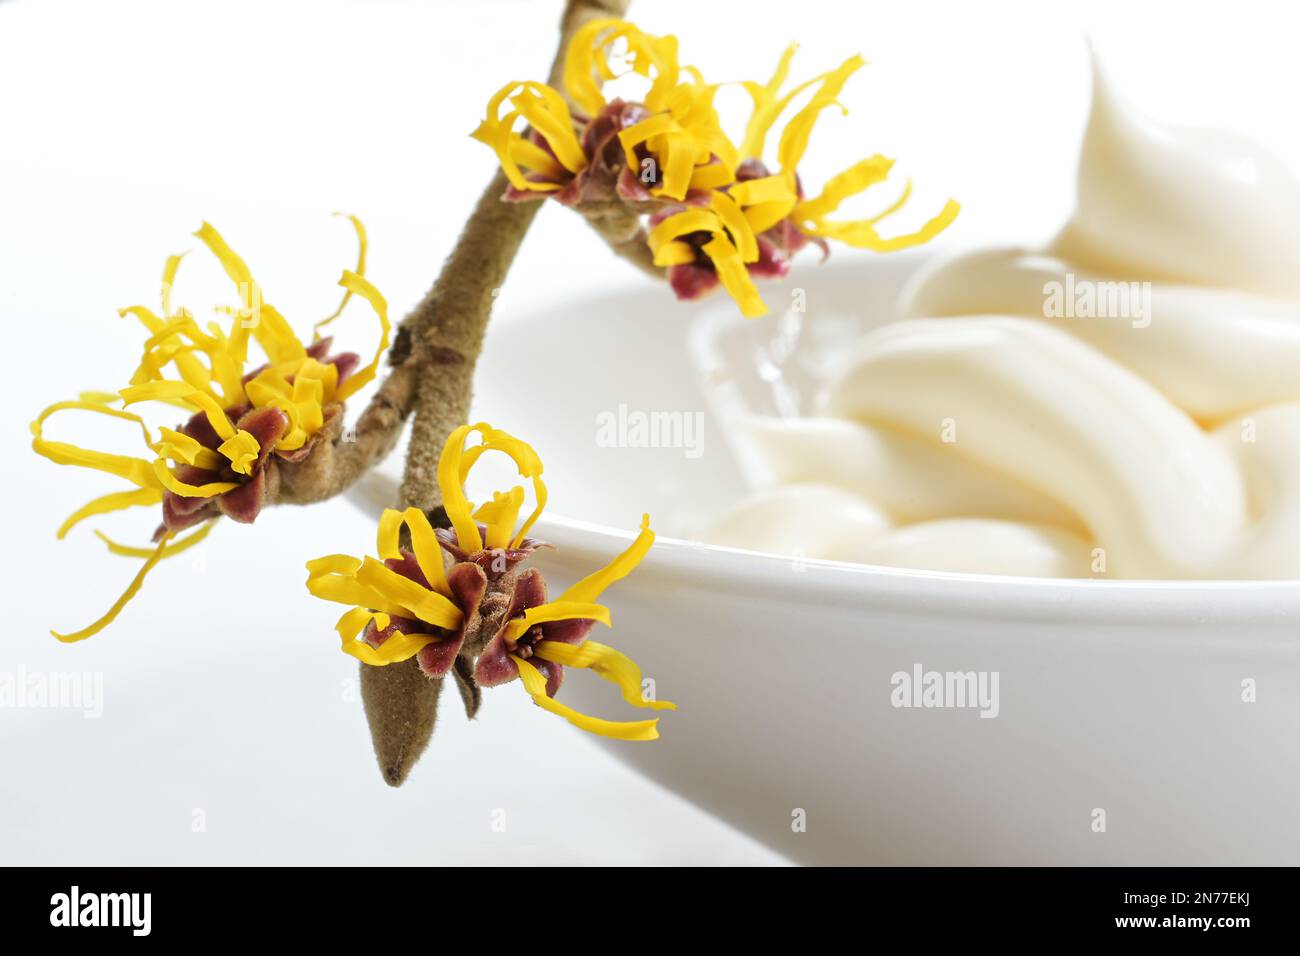 Blooming witch hazel twig (hamamelis) with yellow flowers in front of a blurry bowl with skin care cream, cosmetics from nature, white background, clo Stock Photo